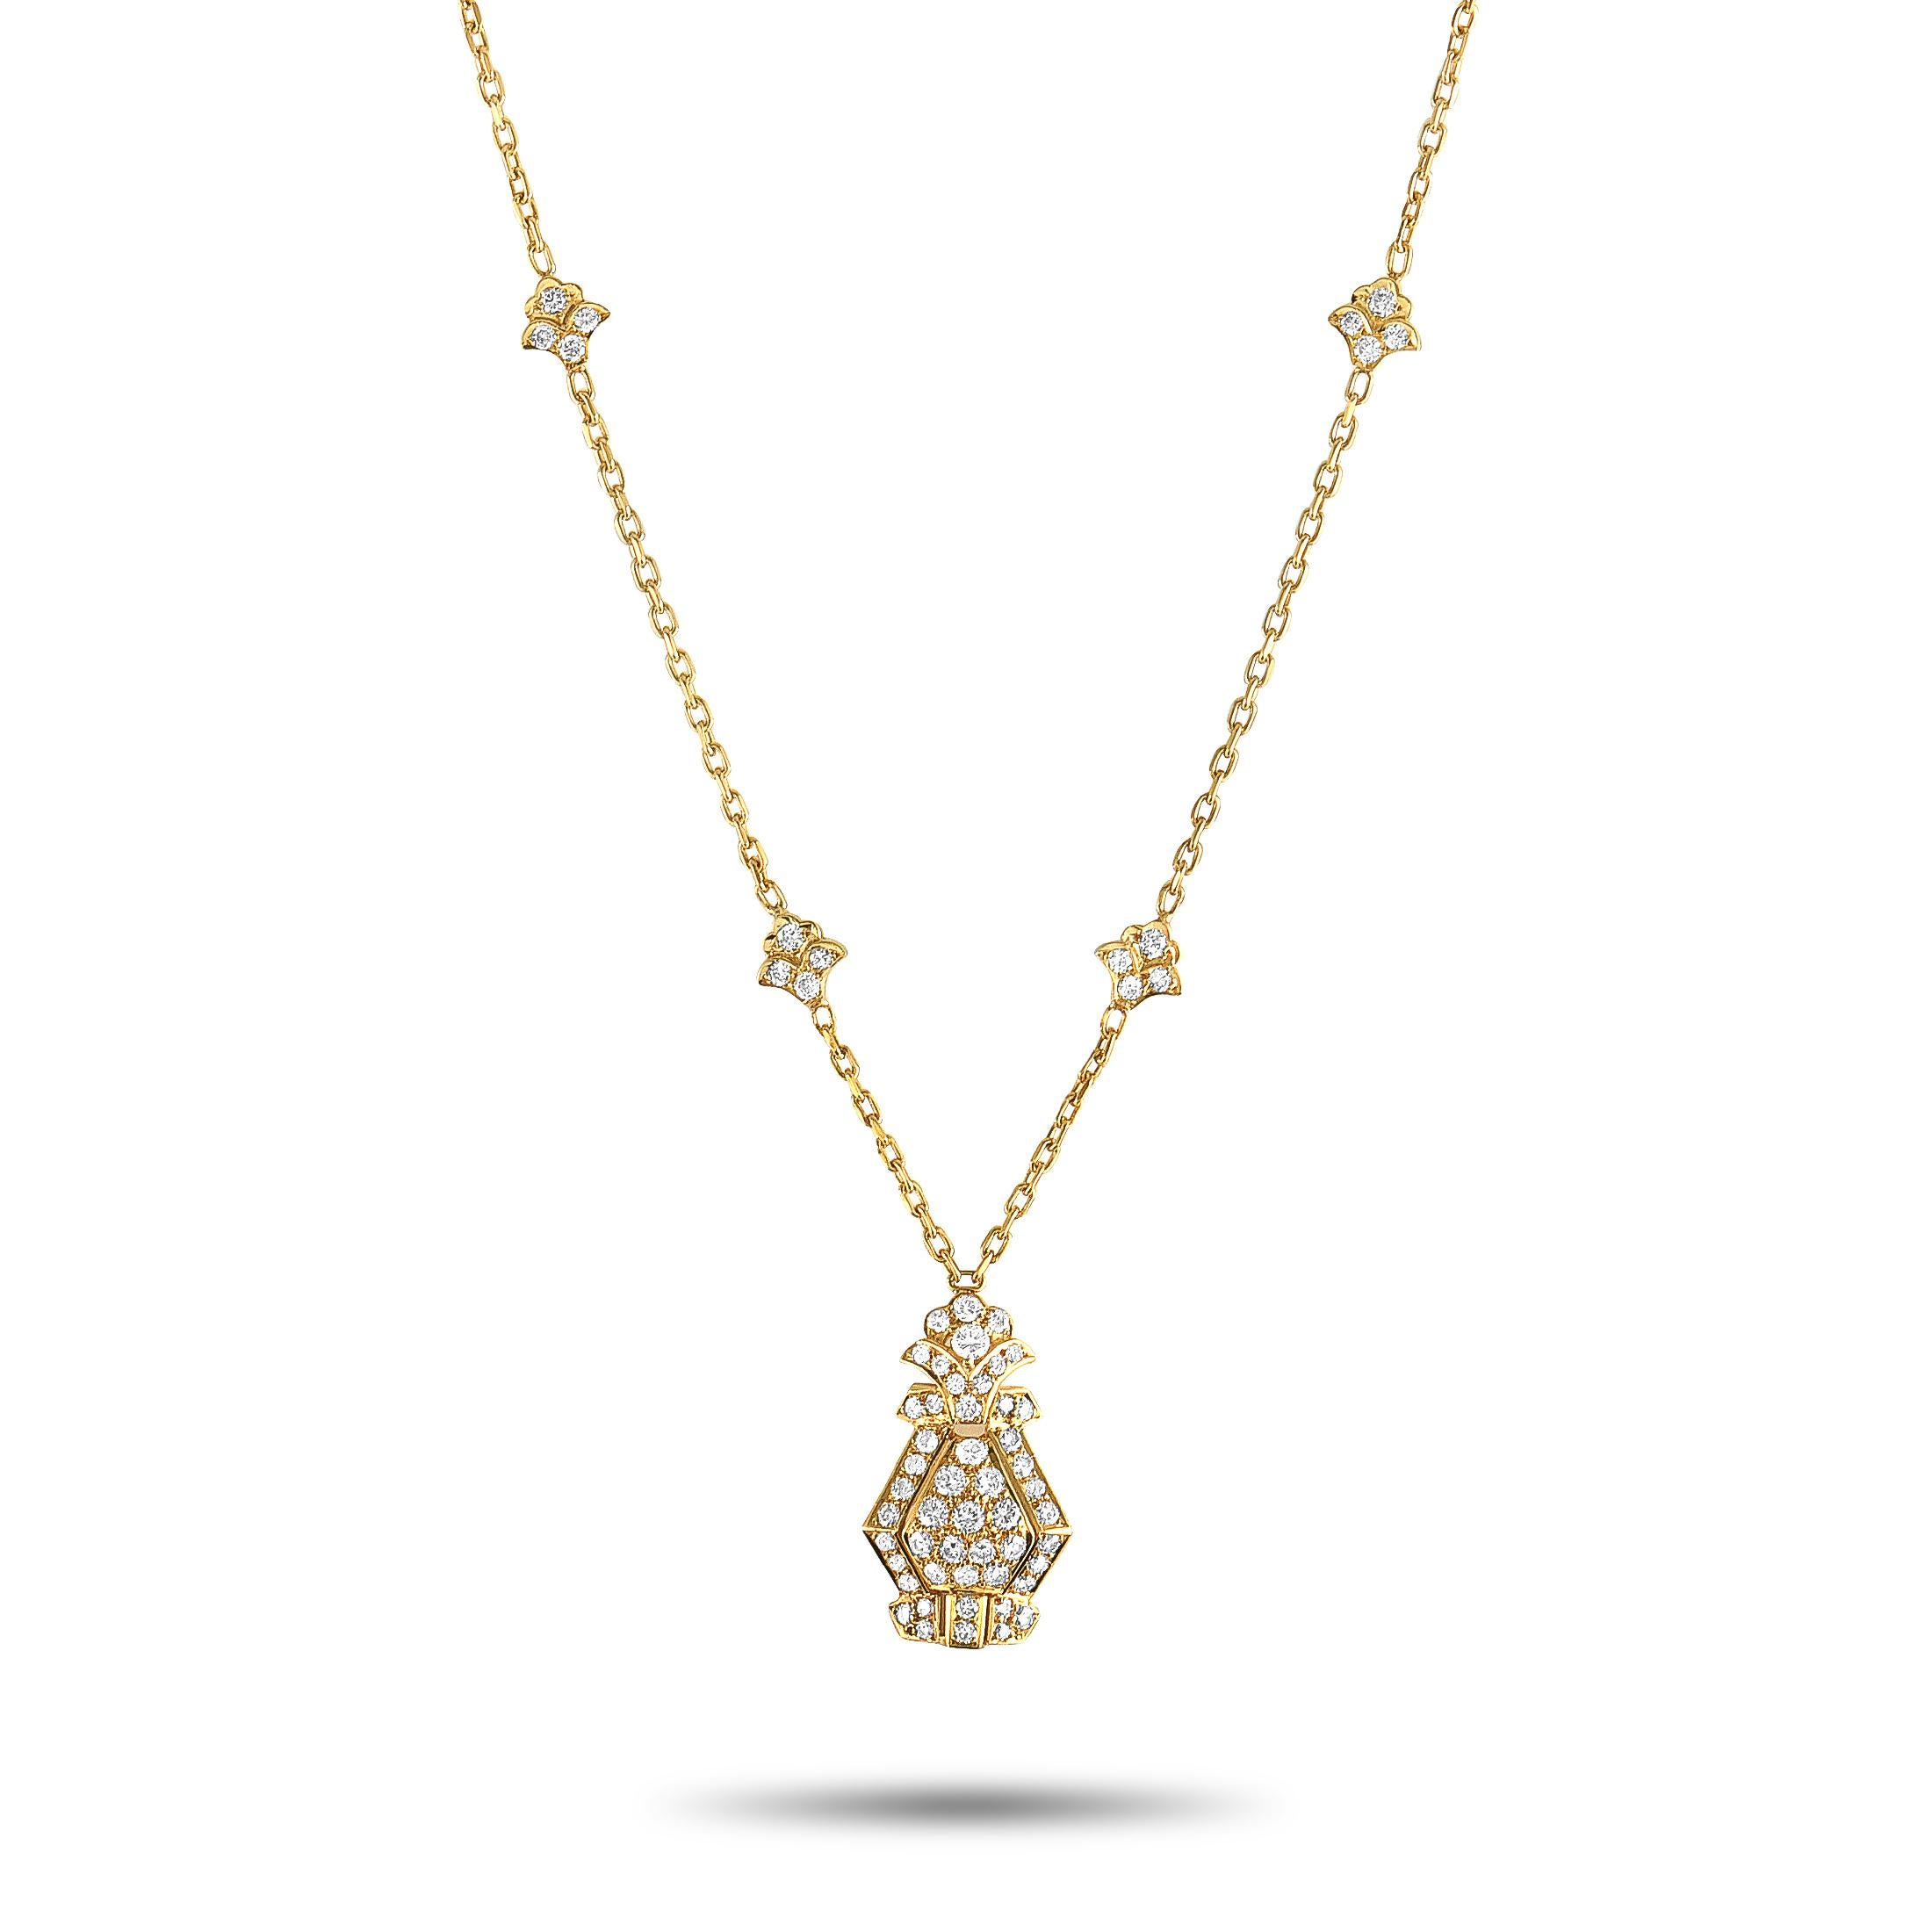 This vintage Cartier necklace is crafted from 18K yellow gold, featuring a 16” chain with spring ring closure and a pendant that measures 1” in length and 0.60” in width. The necklace weighs 11.6 grams and is embellished with a total of 1.40 carats